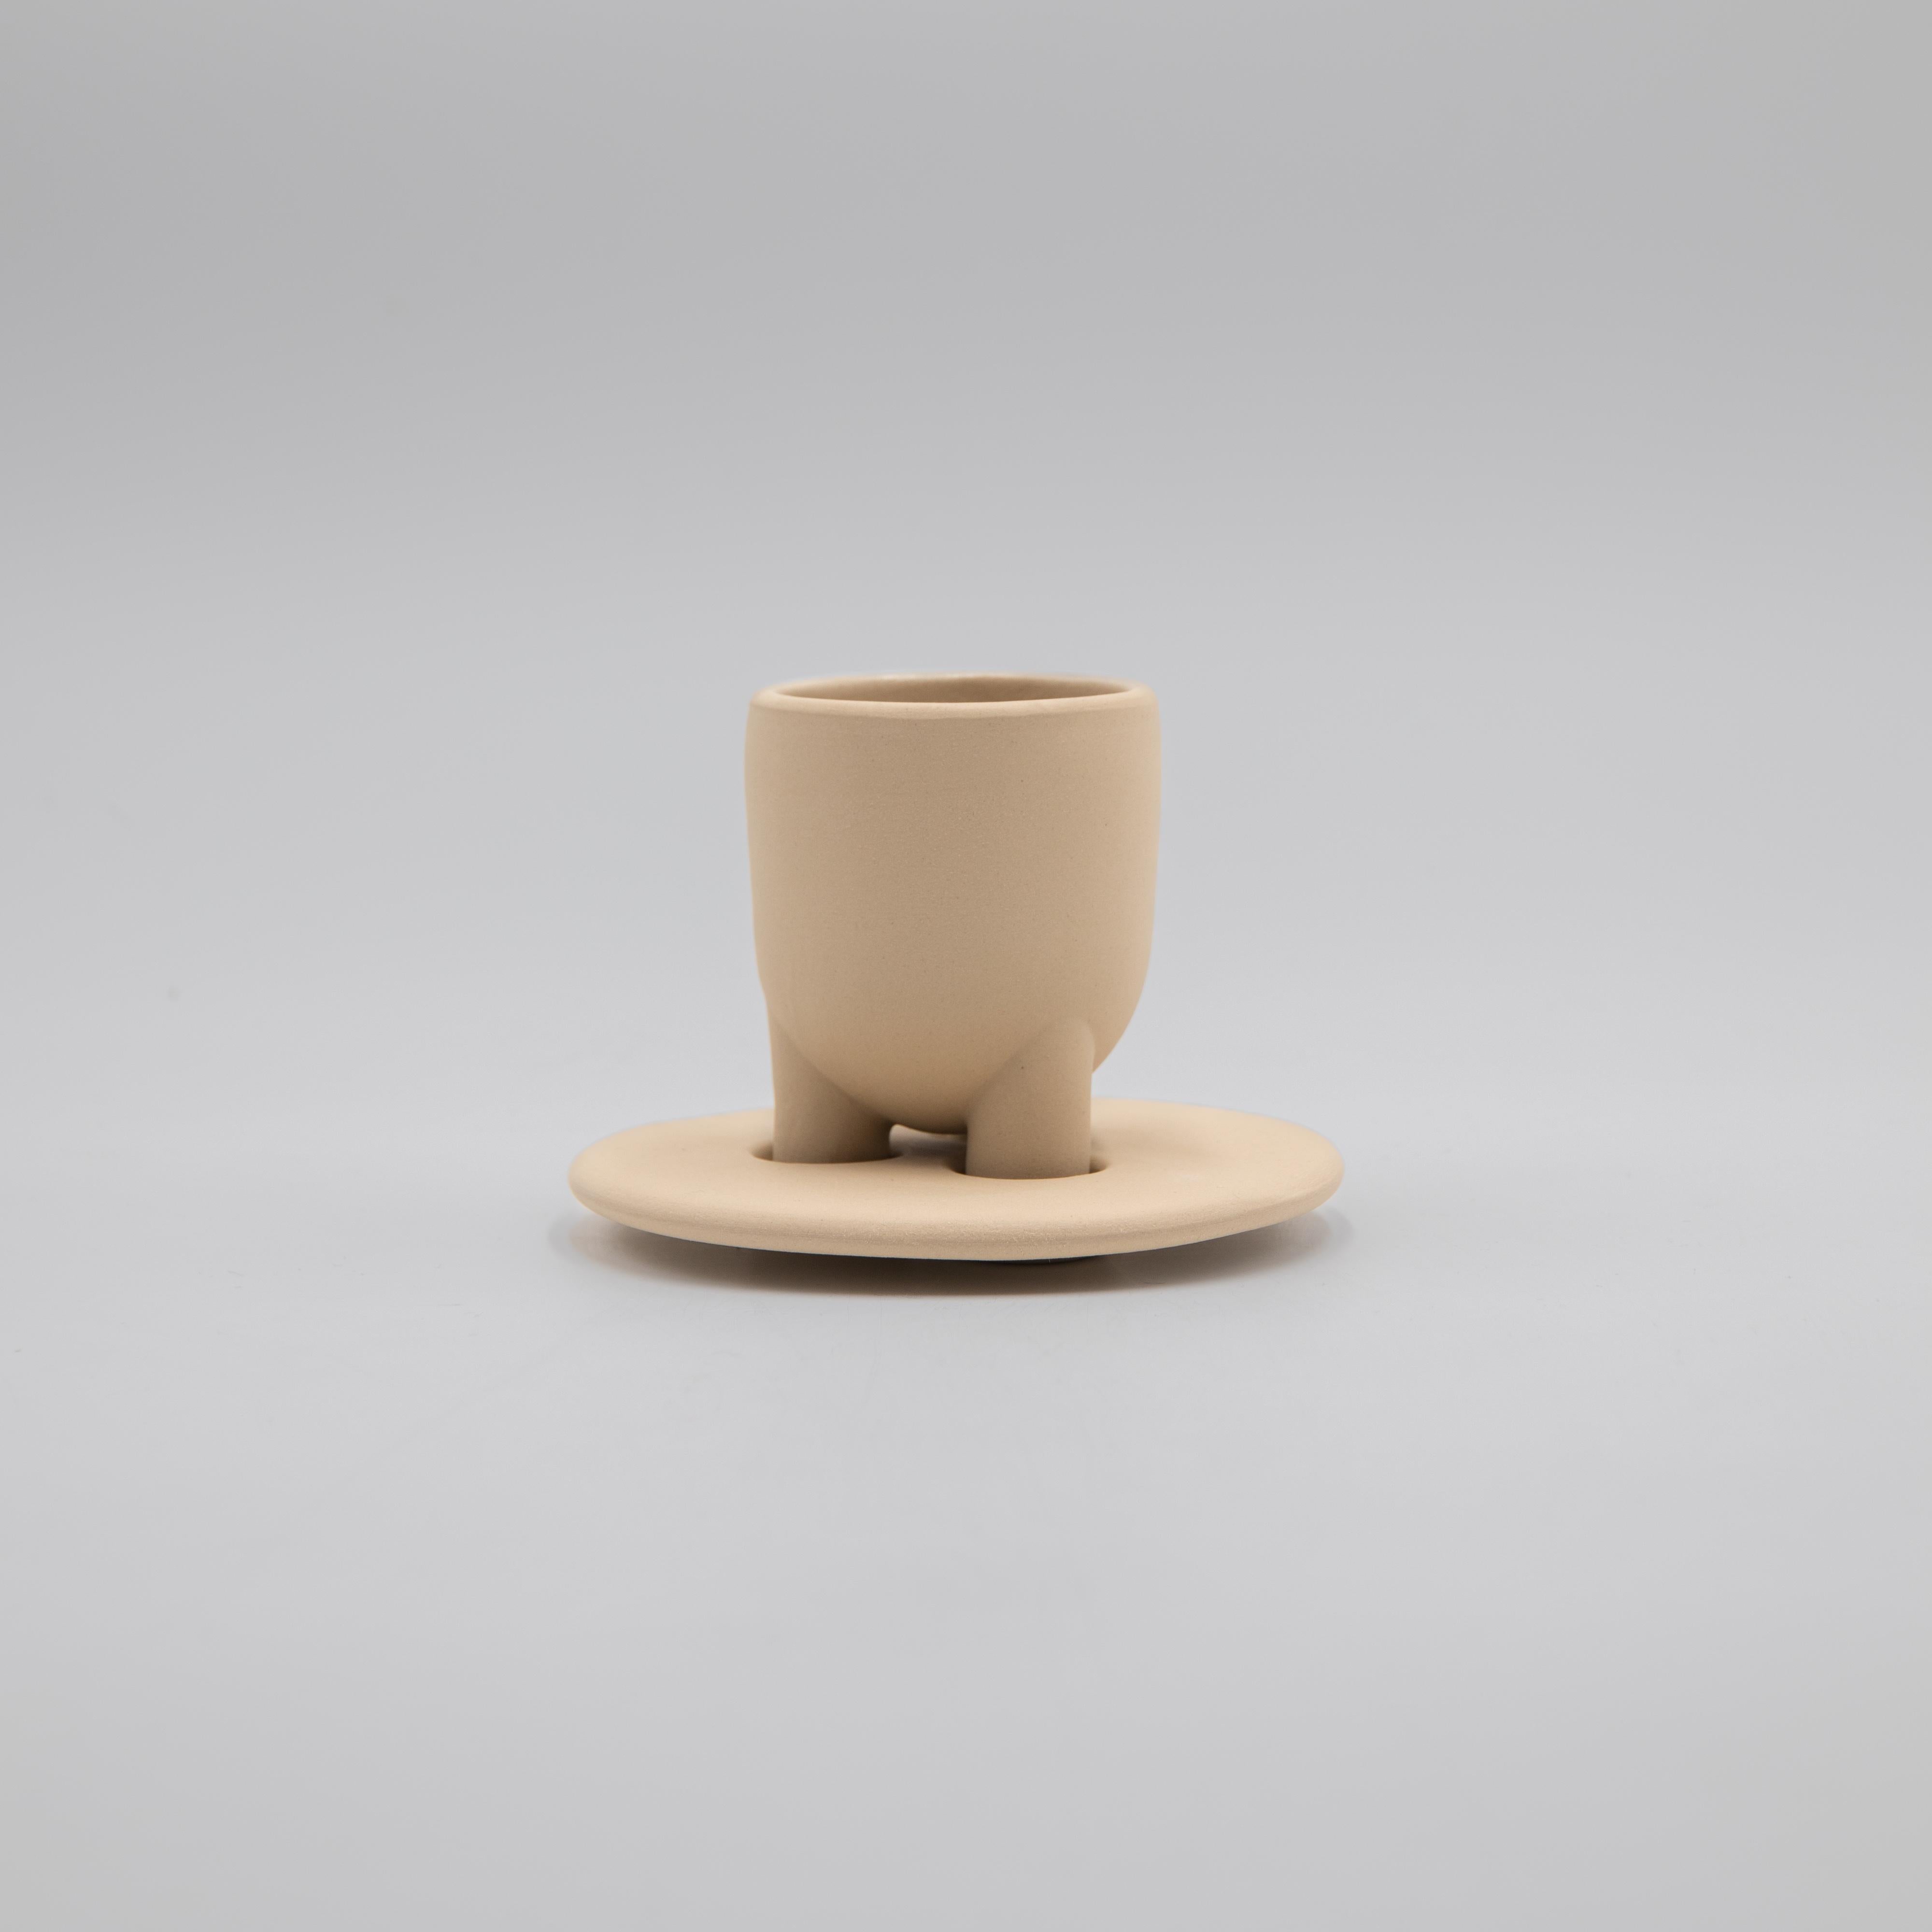 Drawing inspiration from the coffee traditions of Italy and Iran, this stoneware espresso cup and saucer seem both modern and ancient. Simple geometric shapes and clean lines create the unique design with legs that correspond to the saucer.

Made in